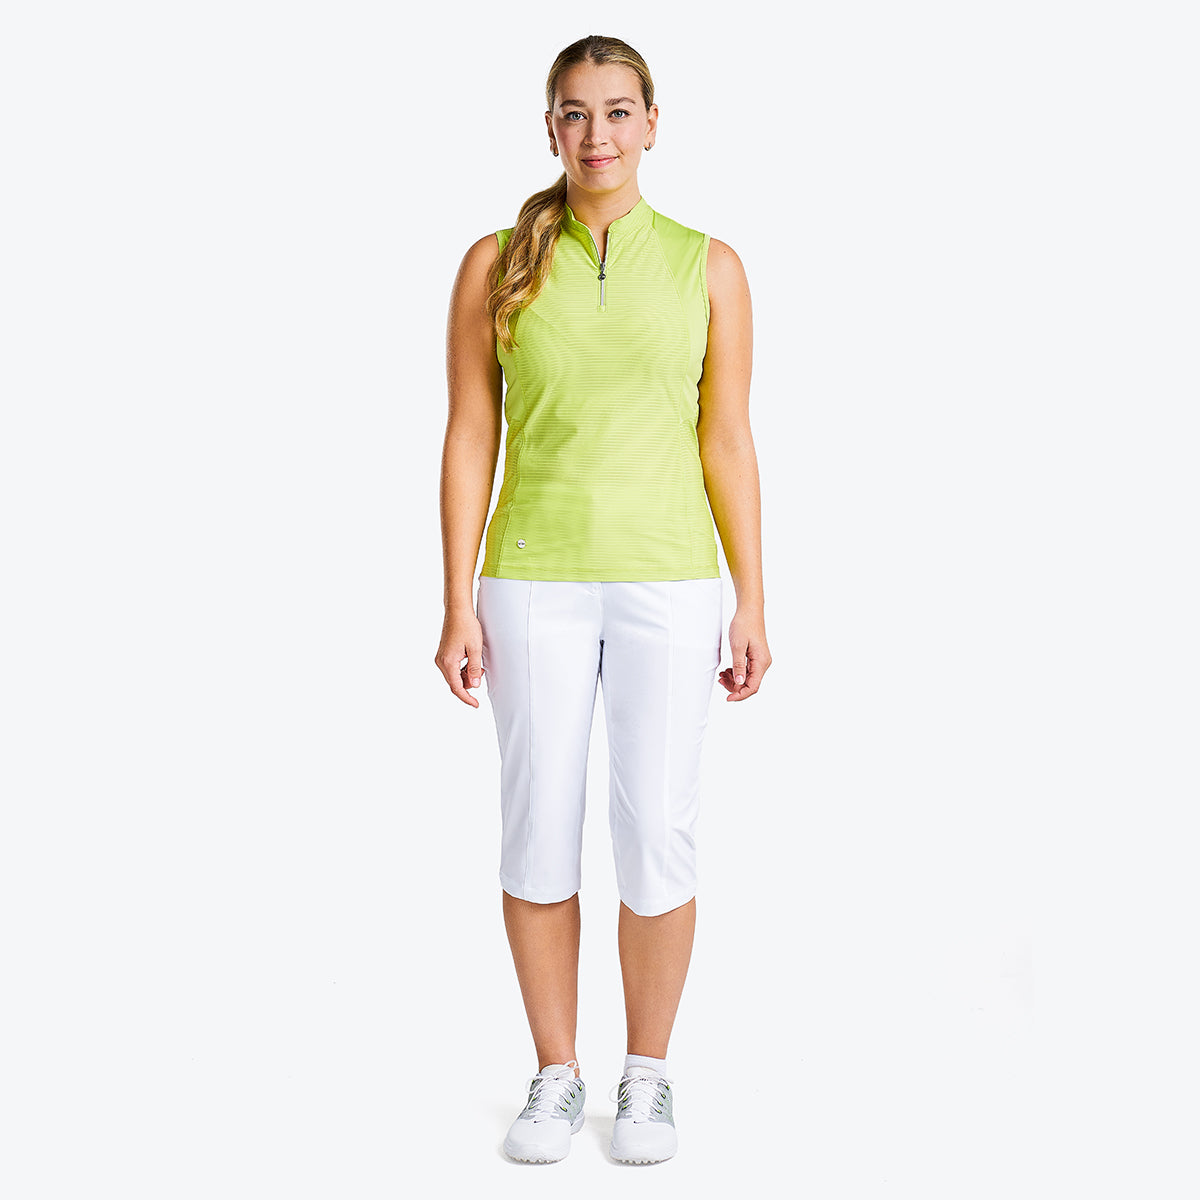 Nivo Ladies Sleeveless Polo With Subtle Stripes in Key Lime - Last One XS Only Left